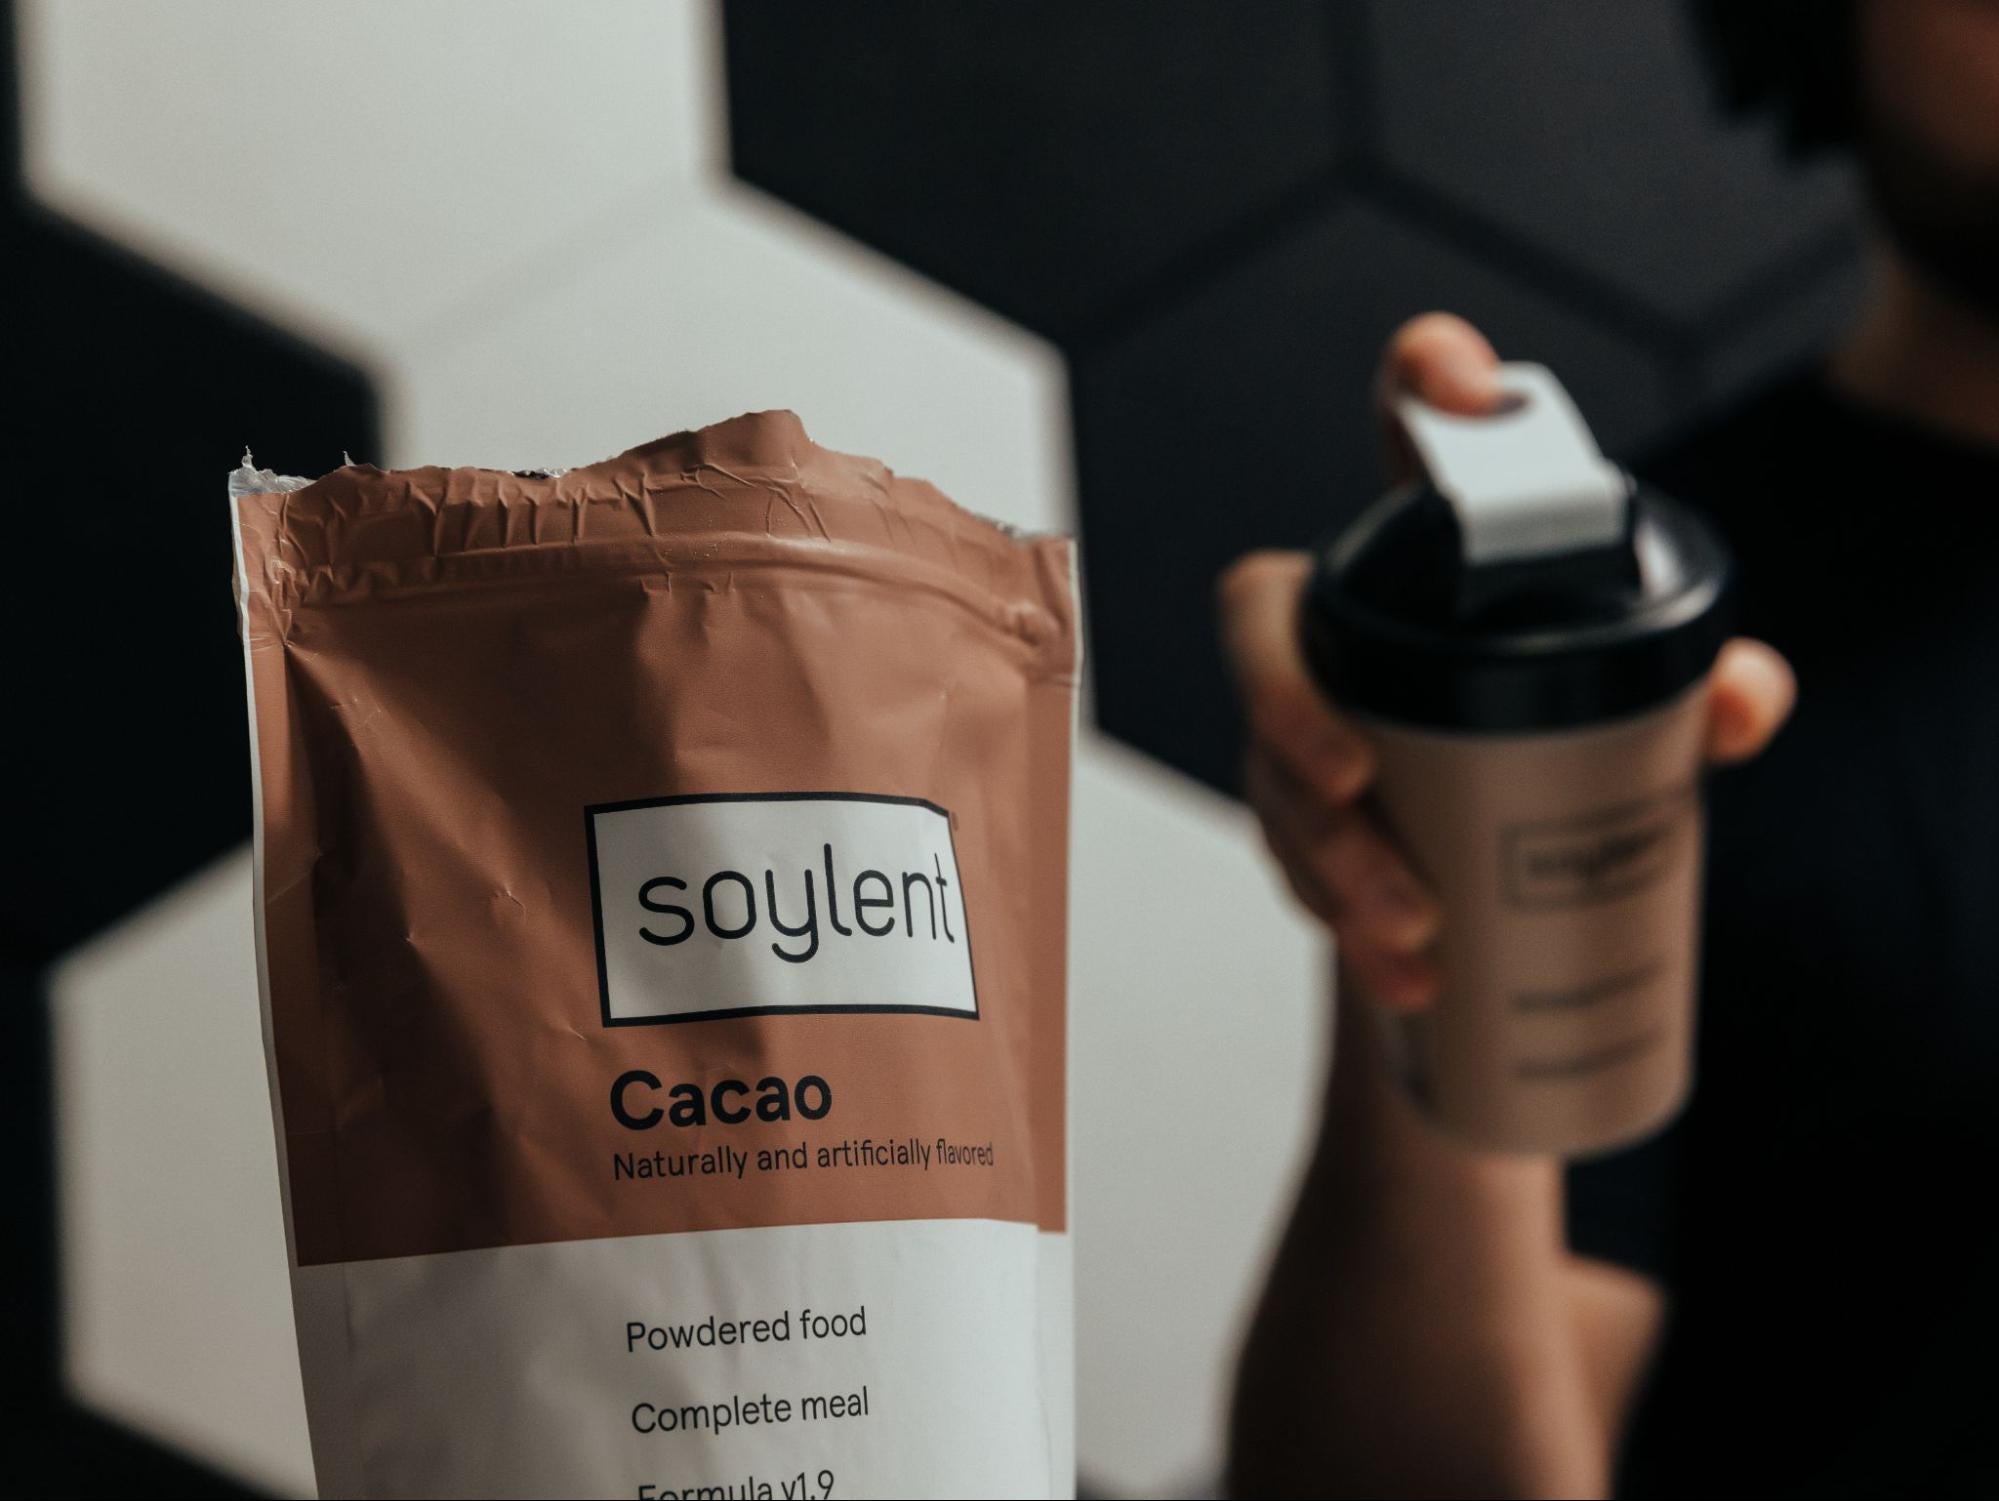 Cacao Soylent Powder Bag with Bottle